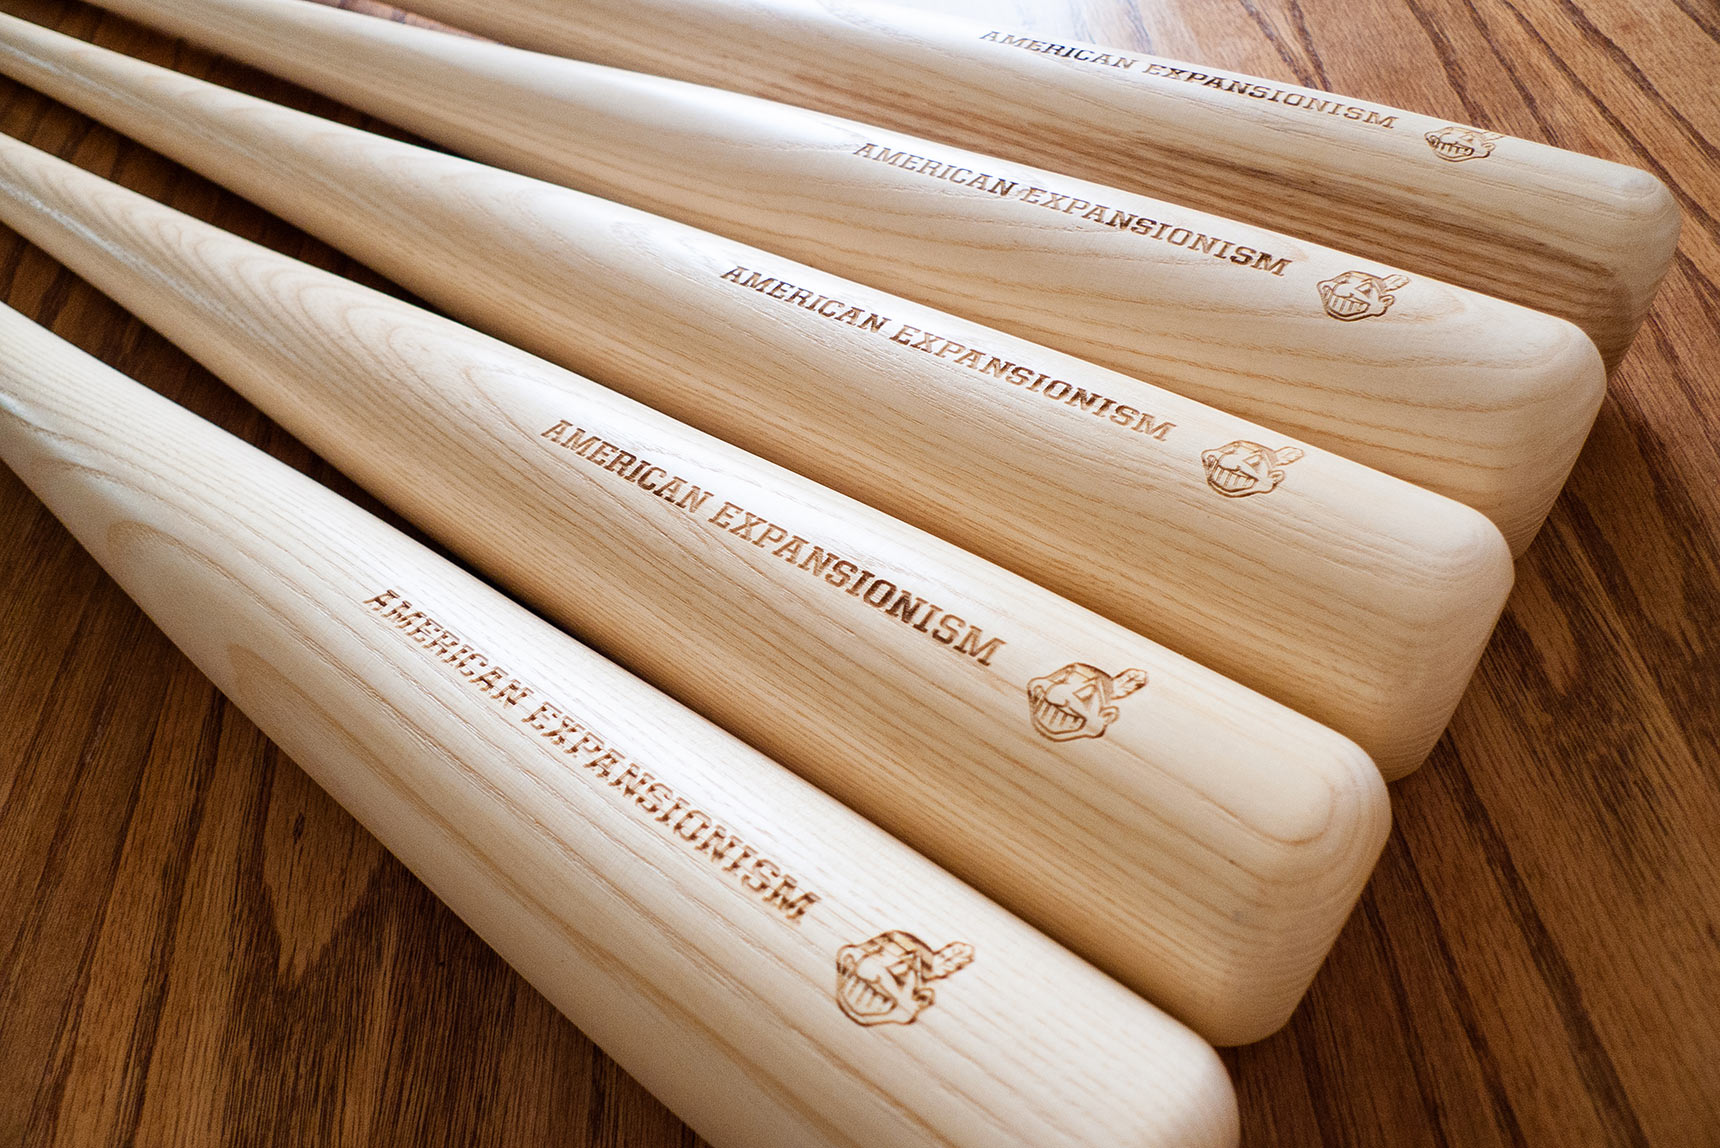 American Expansionism, 2012. A set of 5 editioned baseball bat sculpture etched with the racist caricature Cleveland Indians logo and the words American Expansionism.